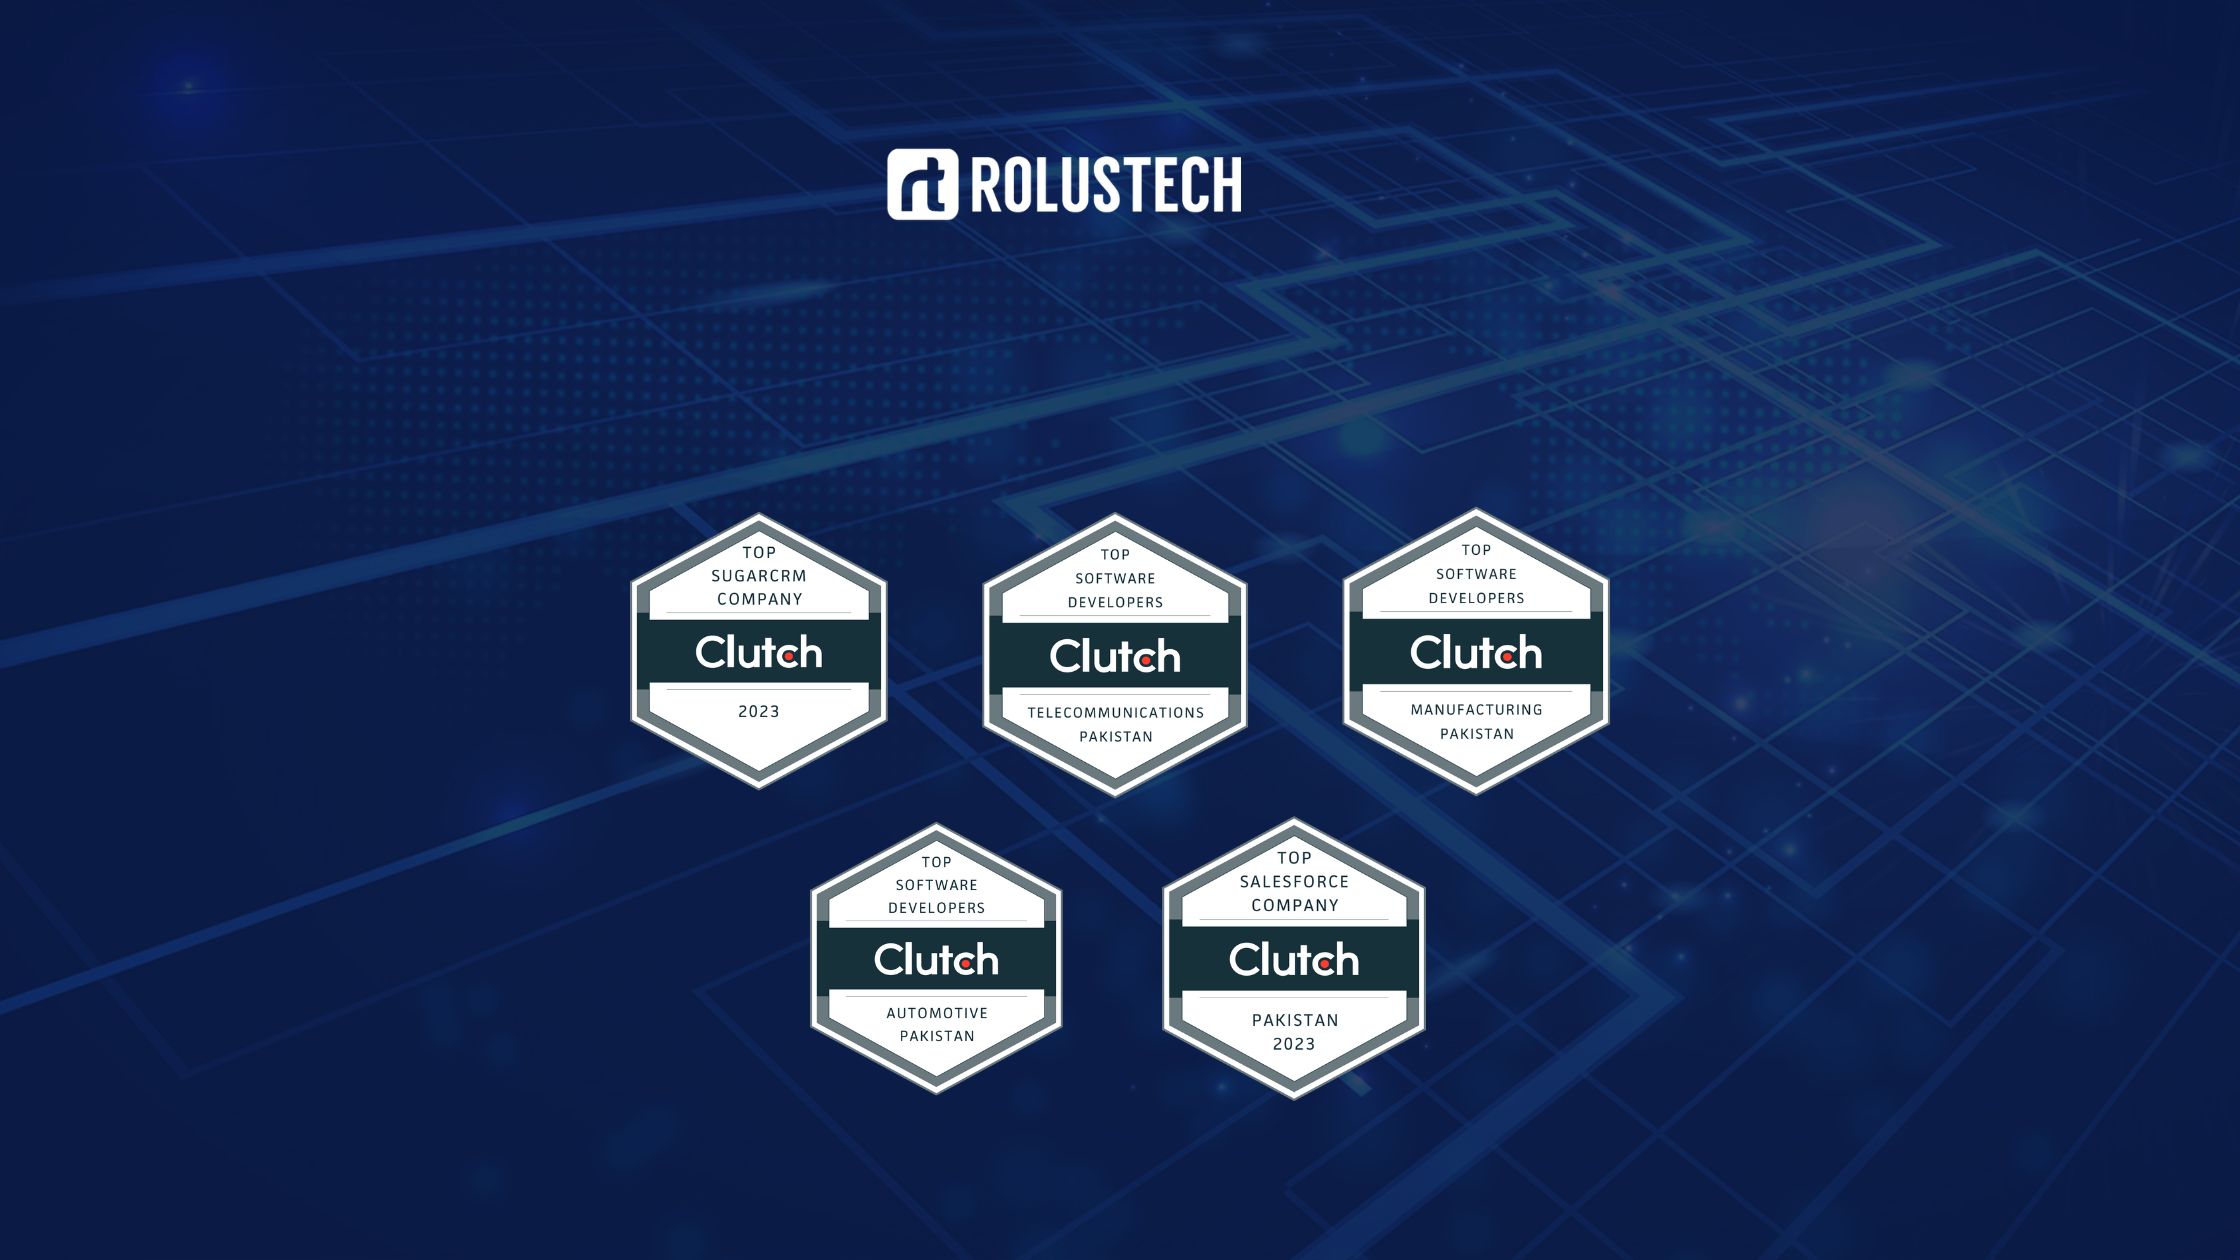 Rolustech Honored with the Clutch Manifest Award for Outstanding IT Services